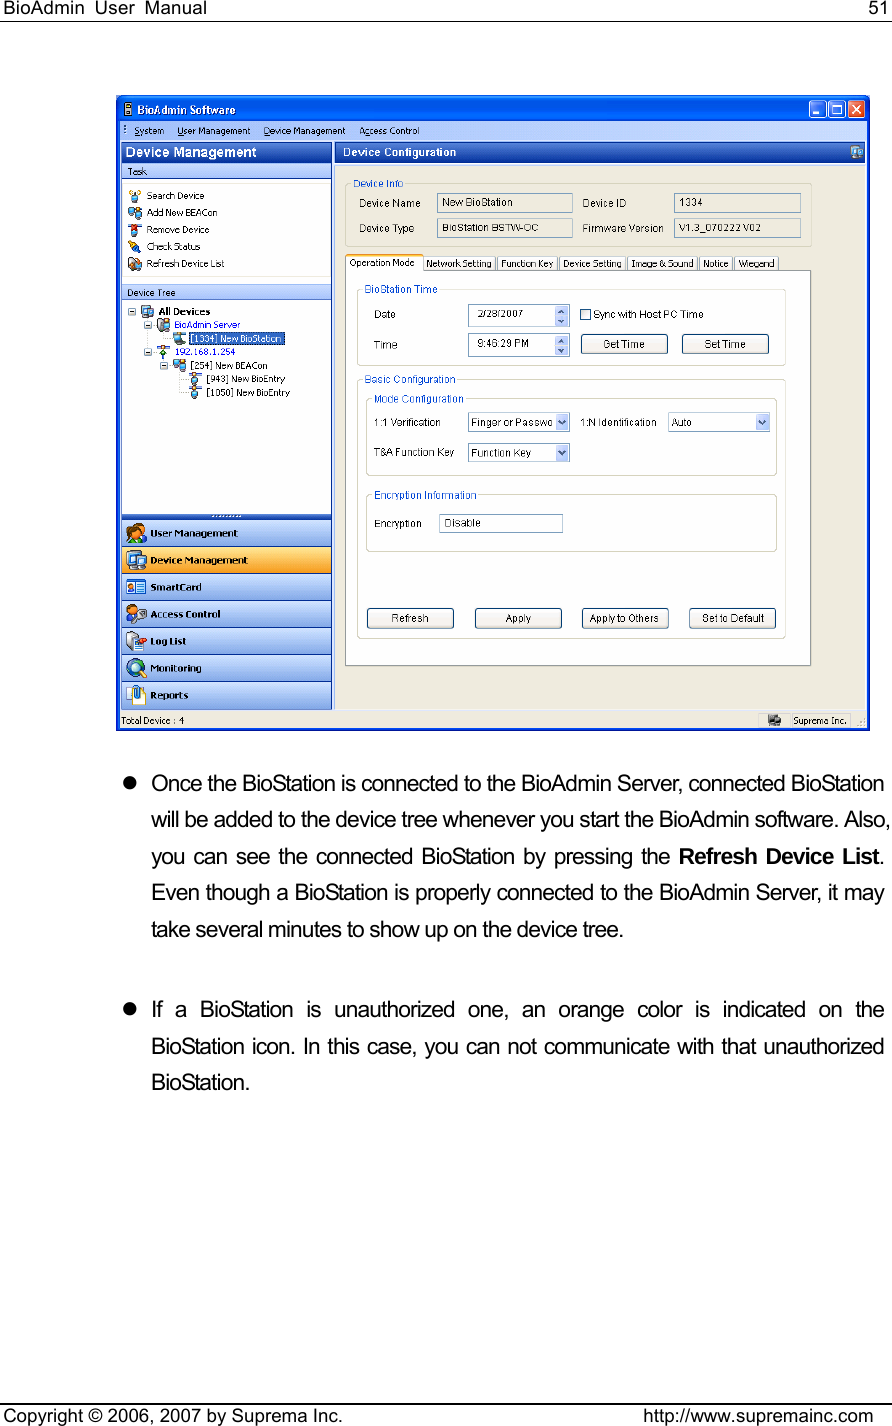 BioAdmin User Manual                                                                     51   Copyright © 2006, 2007 by Suprema Inc.                                http://www.supremainc.com  z  Once the BioStation is connected to the BioAdmin Server, connected BioStation will be added to the device tree whenever you start the BioAdmin software. Also, you can see the connected BioStation by pressing the Refresh Device List. Even though a BioStation is properly connected to the BioAdmin Server, it may take several minutes to show up on the device tree.    z If a BioStation is unauthorized one, an orange color is indicated on the BioStation icon. In this case, you can not communicate with that unauthorized BioStation.   